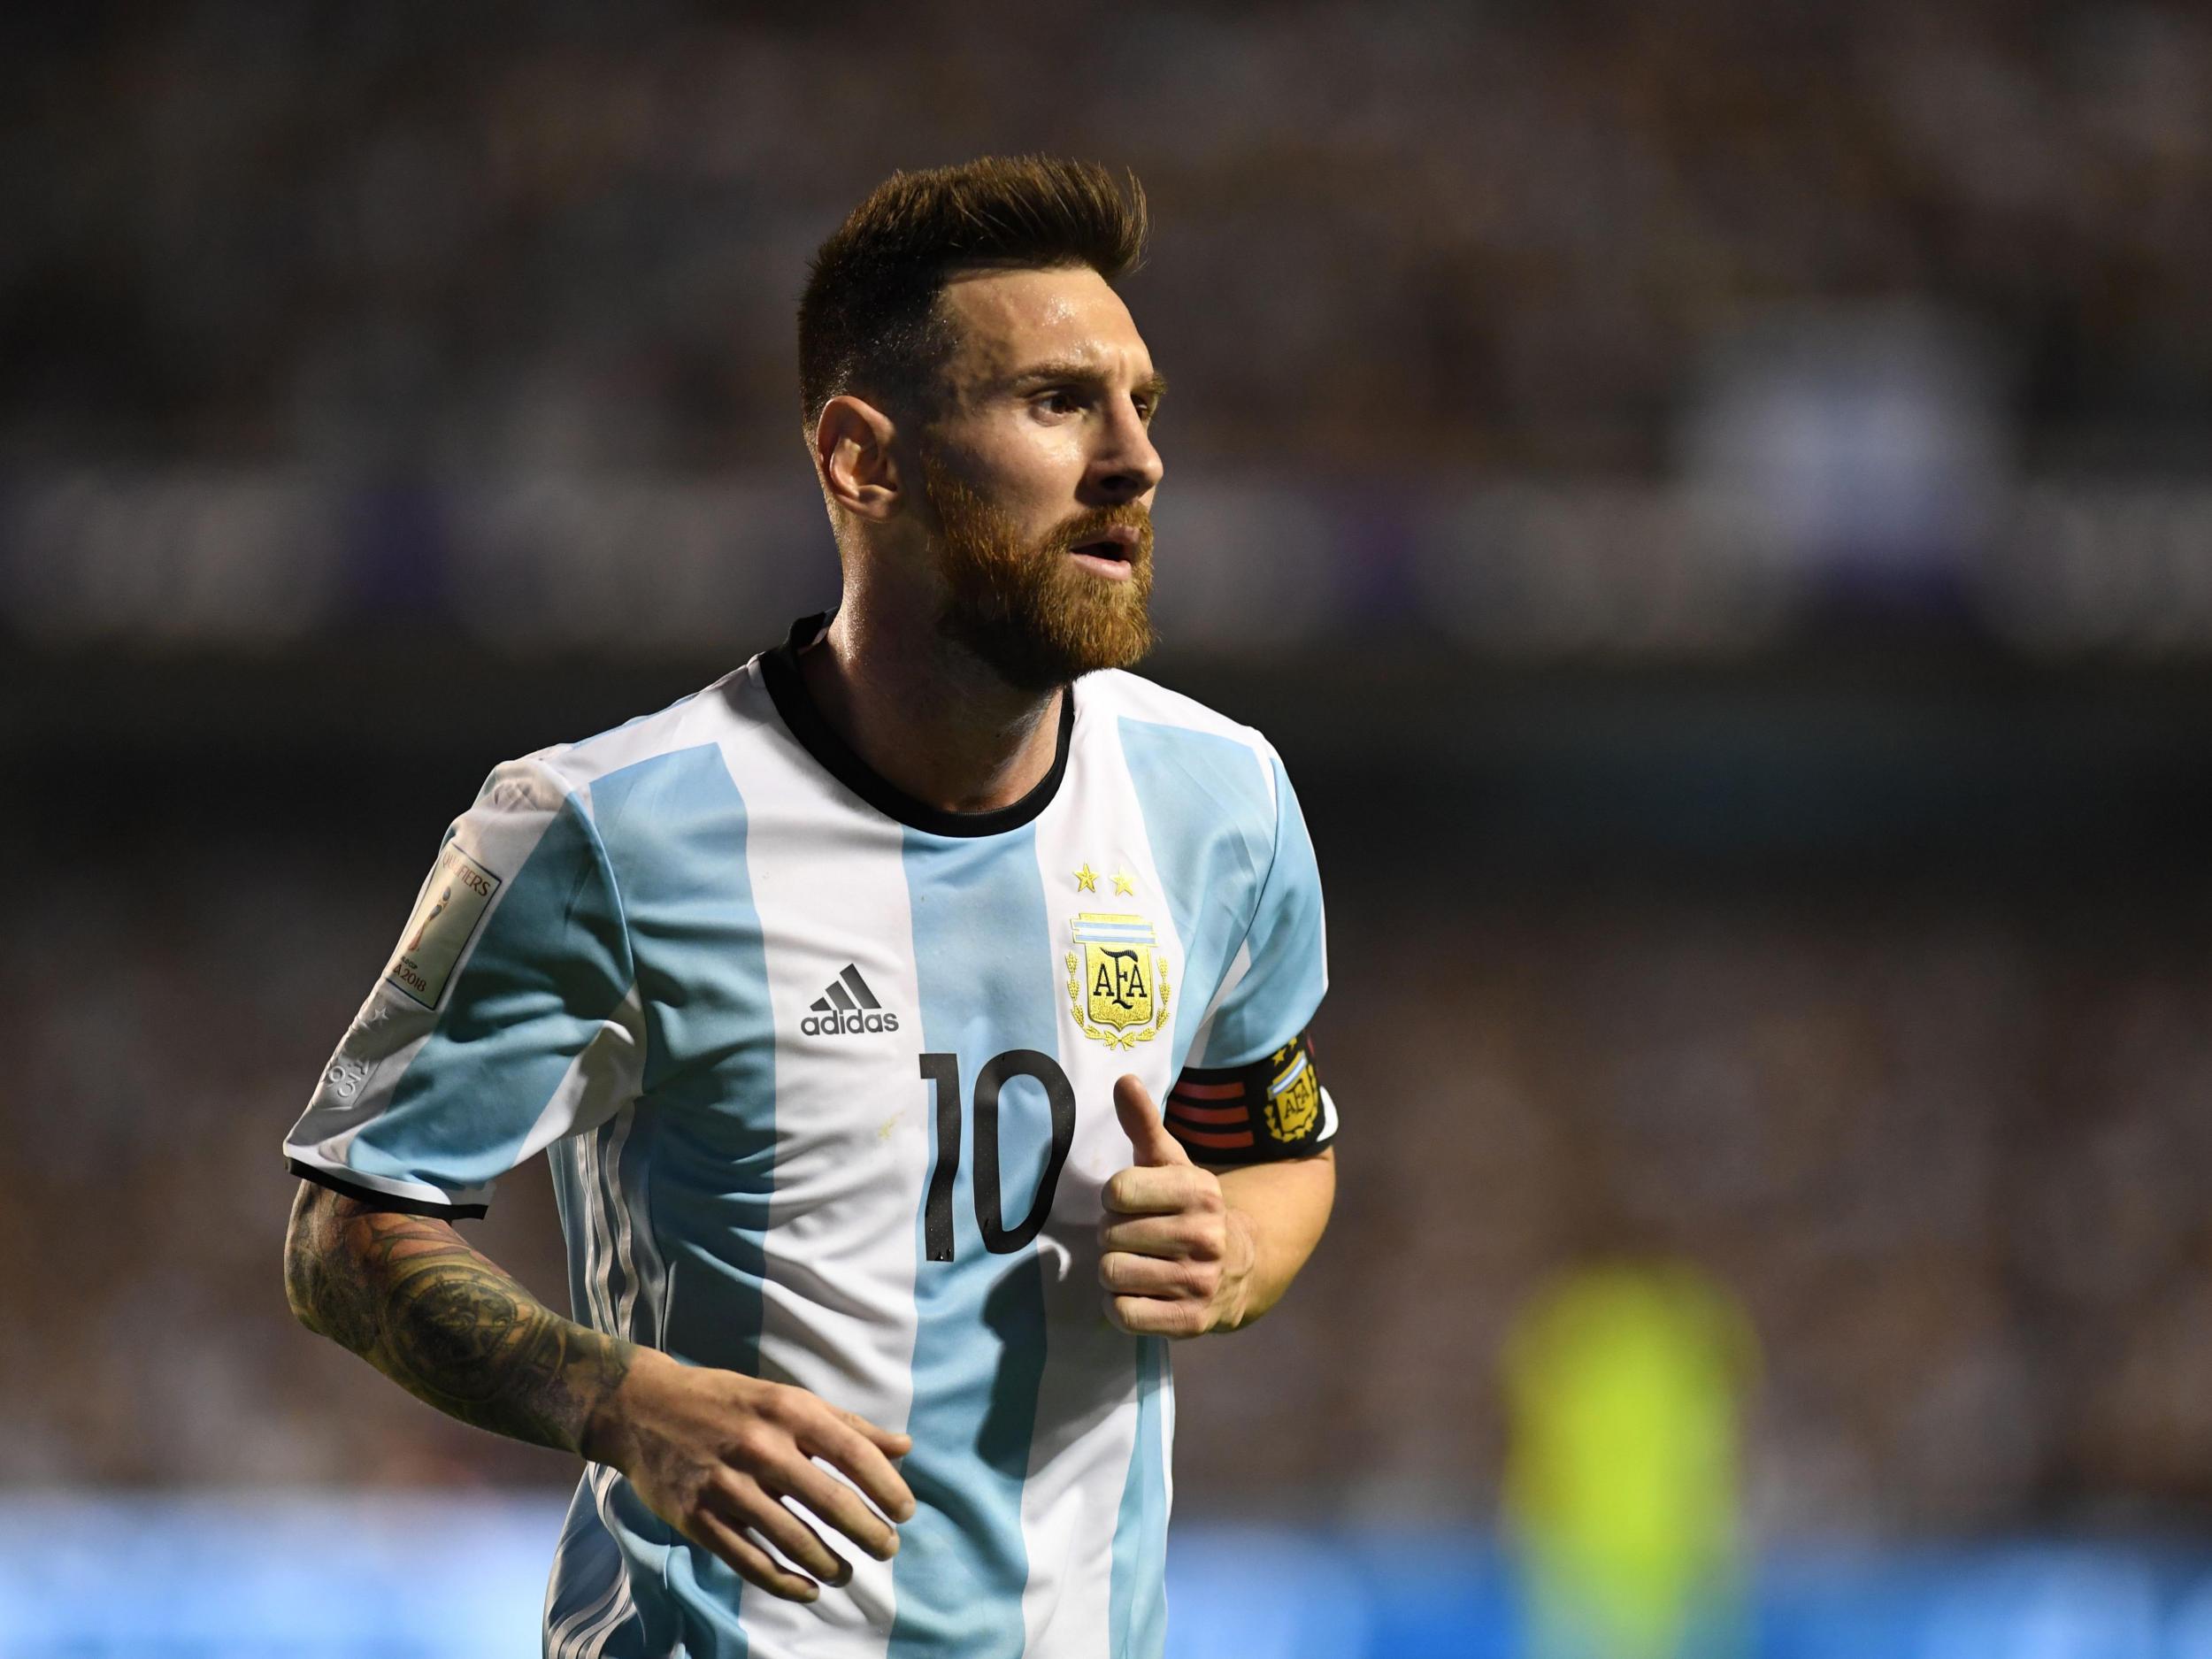 Lionel Messi will turn 31 next summer and Argentina know this is most likely his final shot at World Cup glory